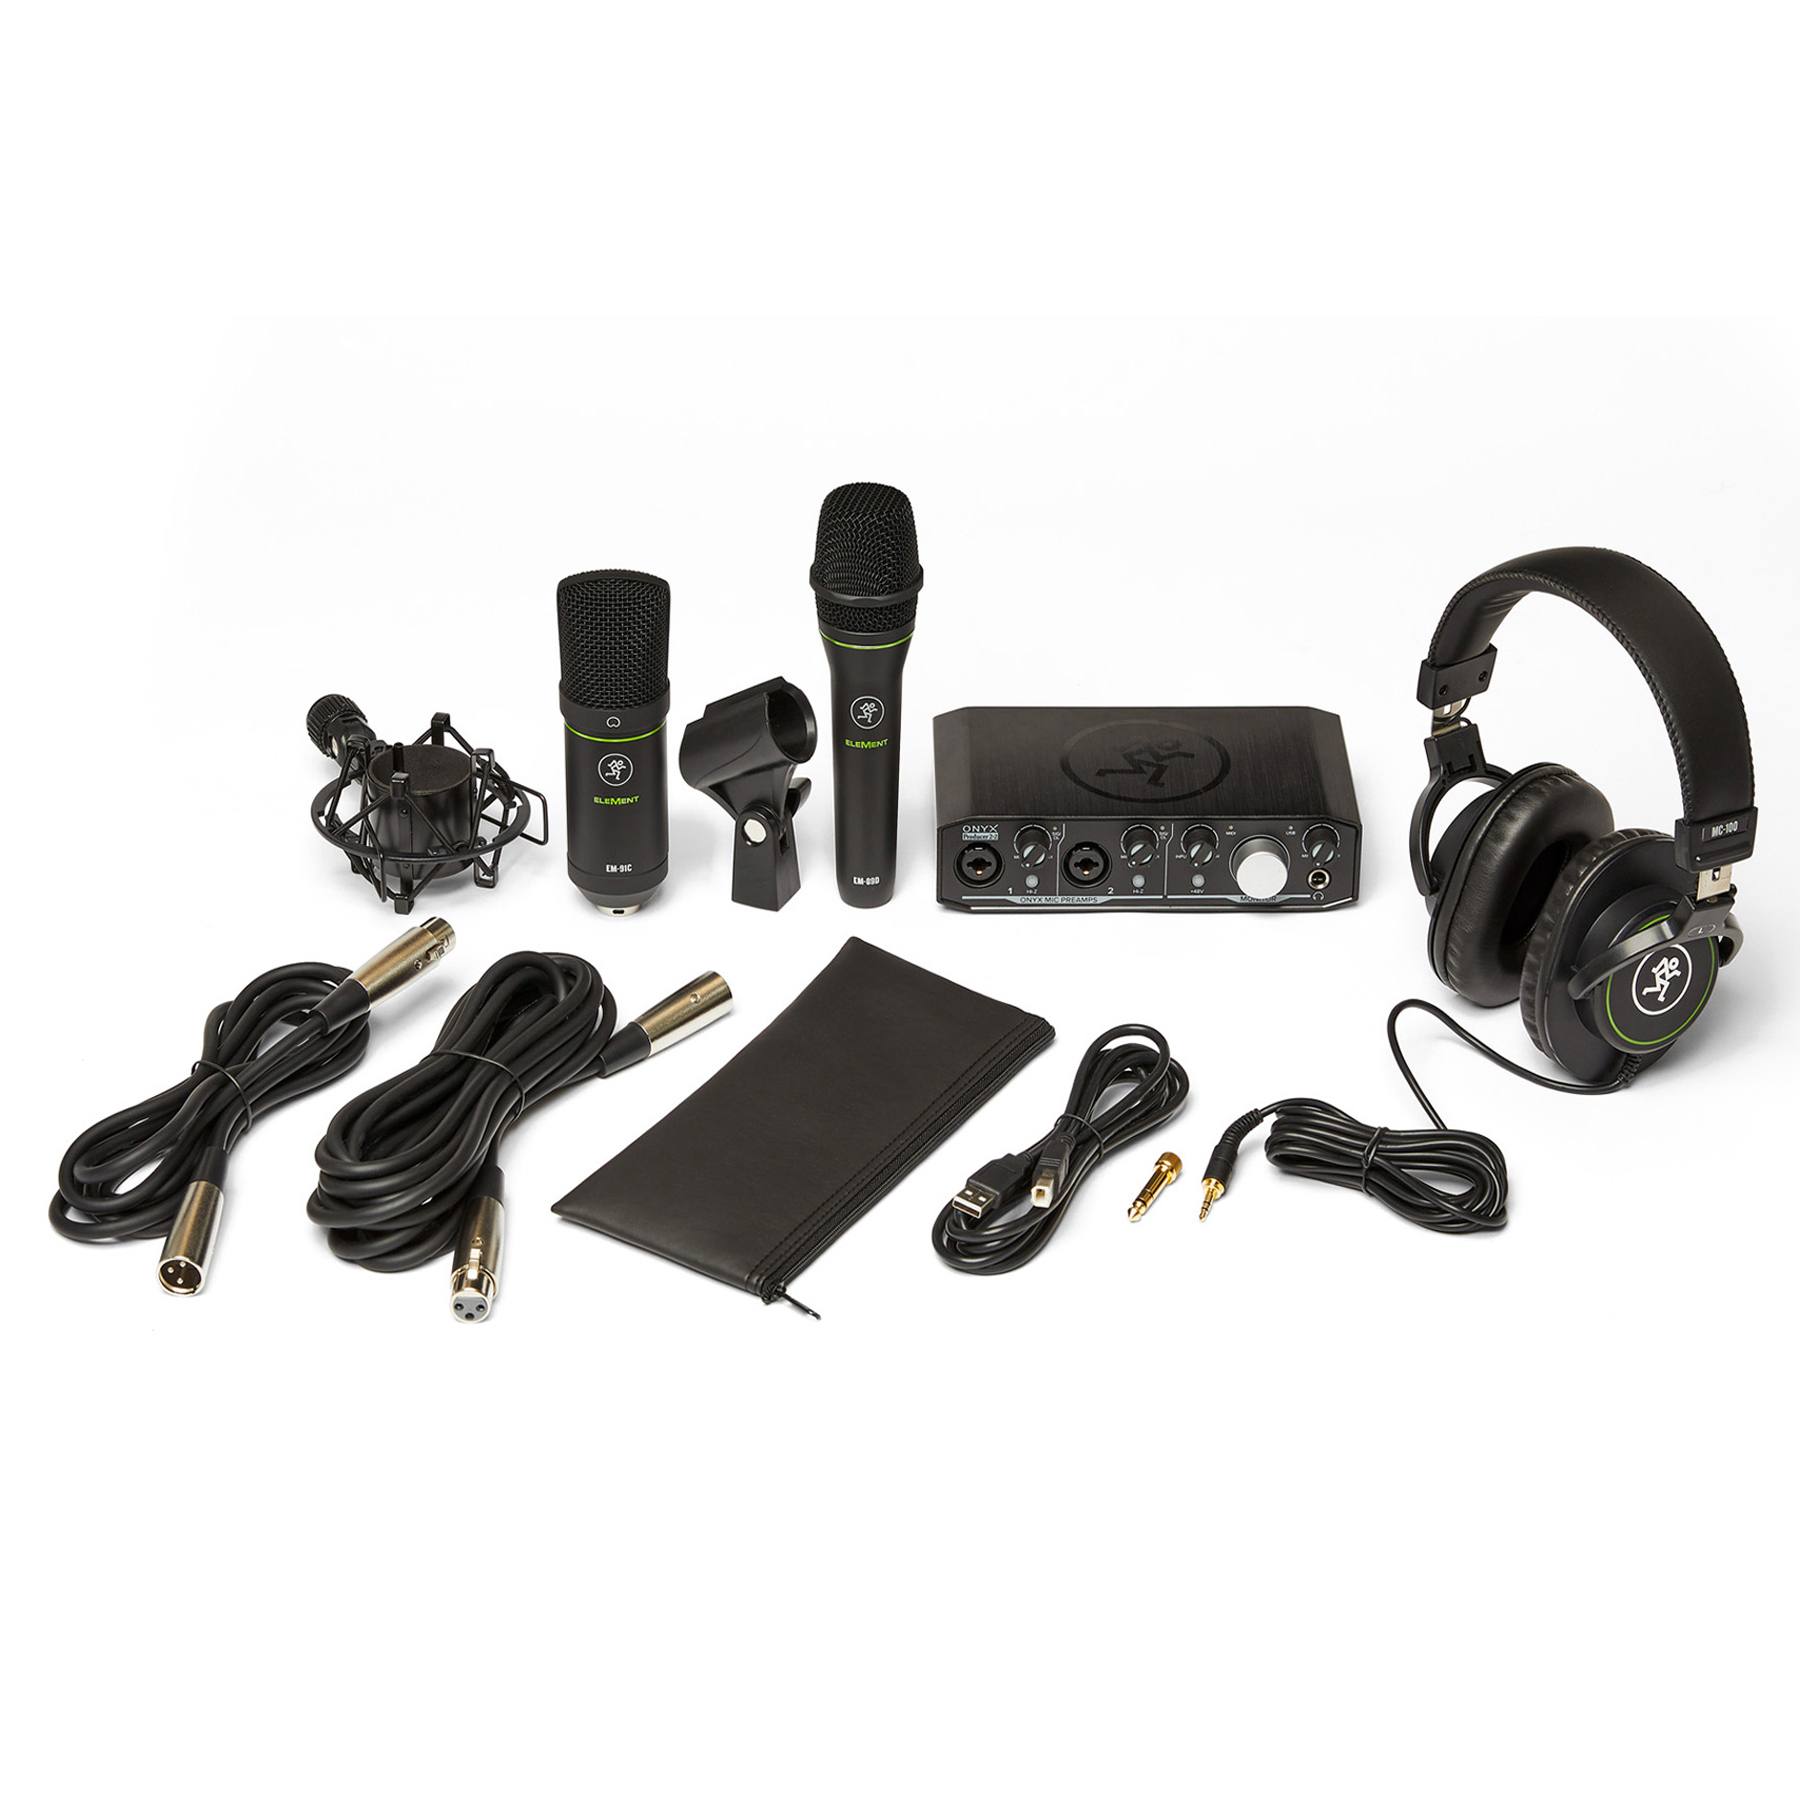 Mackie Producer Bundle with USB Interface and Microphones